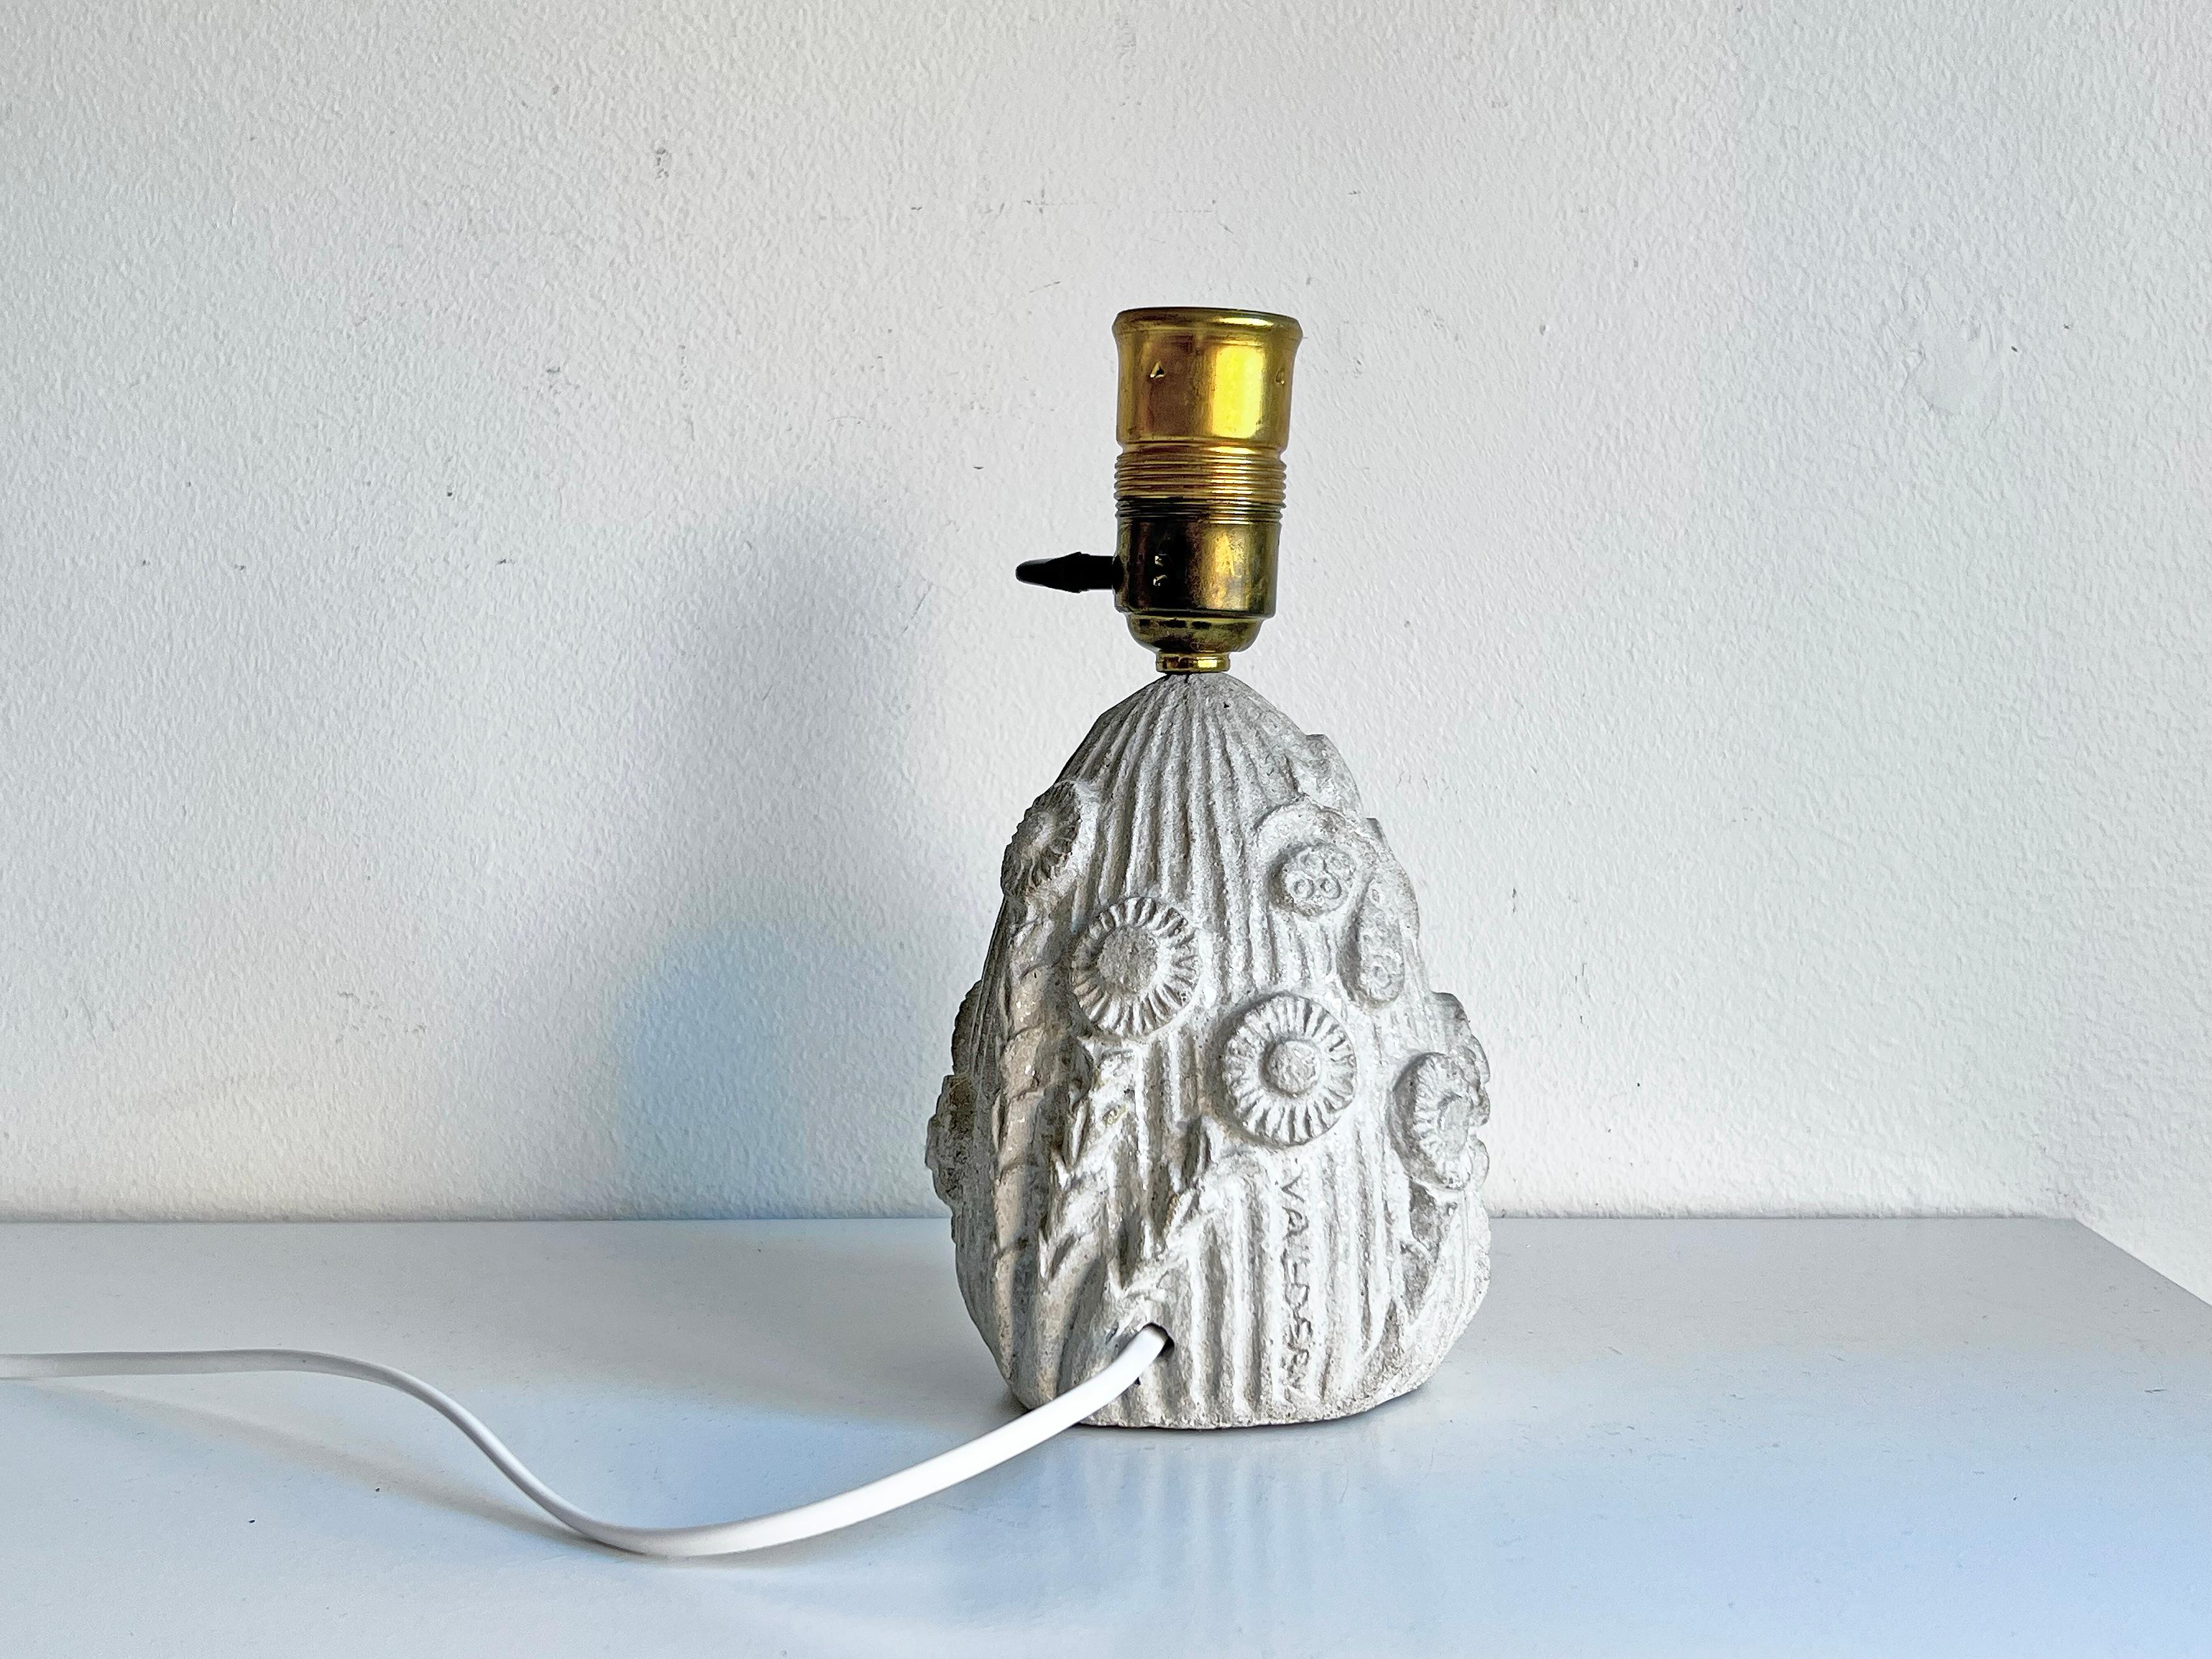 Table Lamp by Erling Valldeby, ca 1940-50s For Sale 2